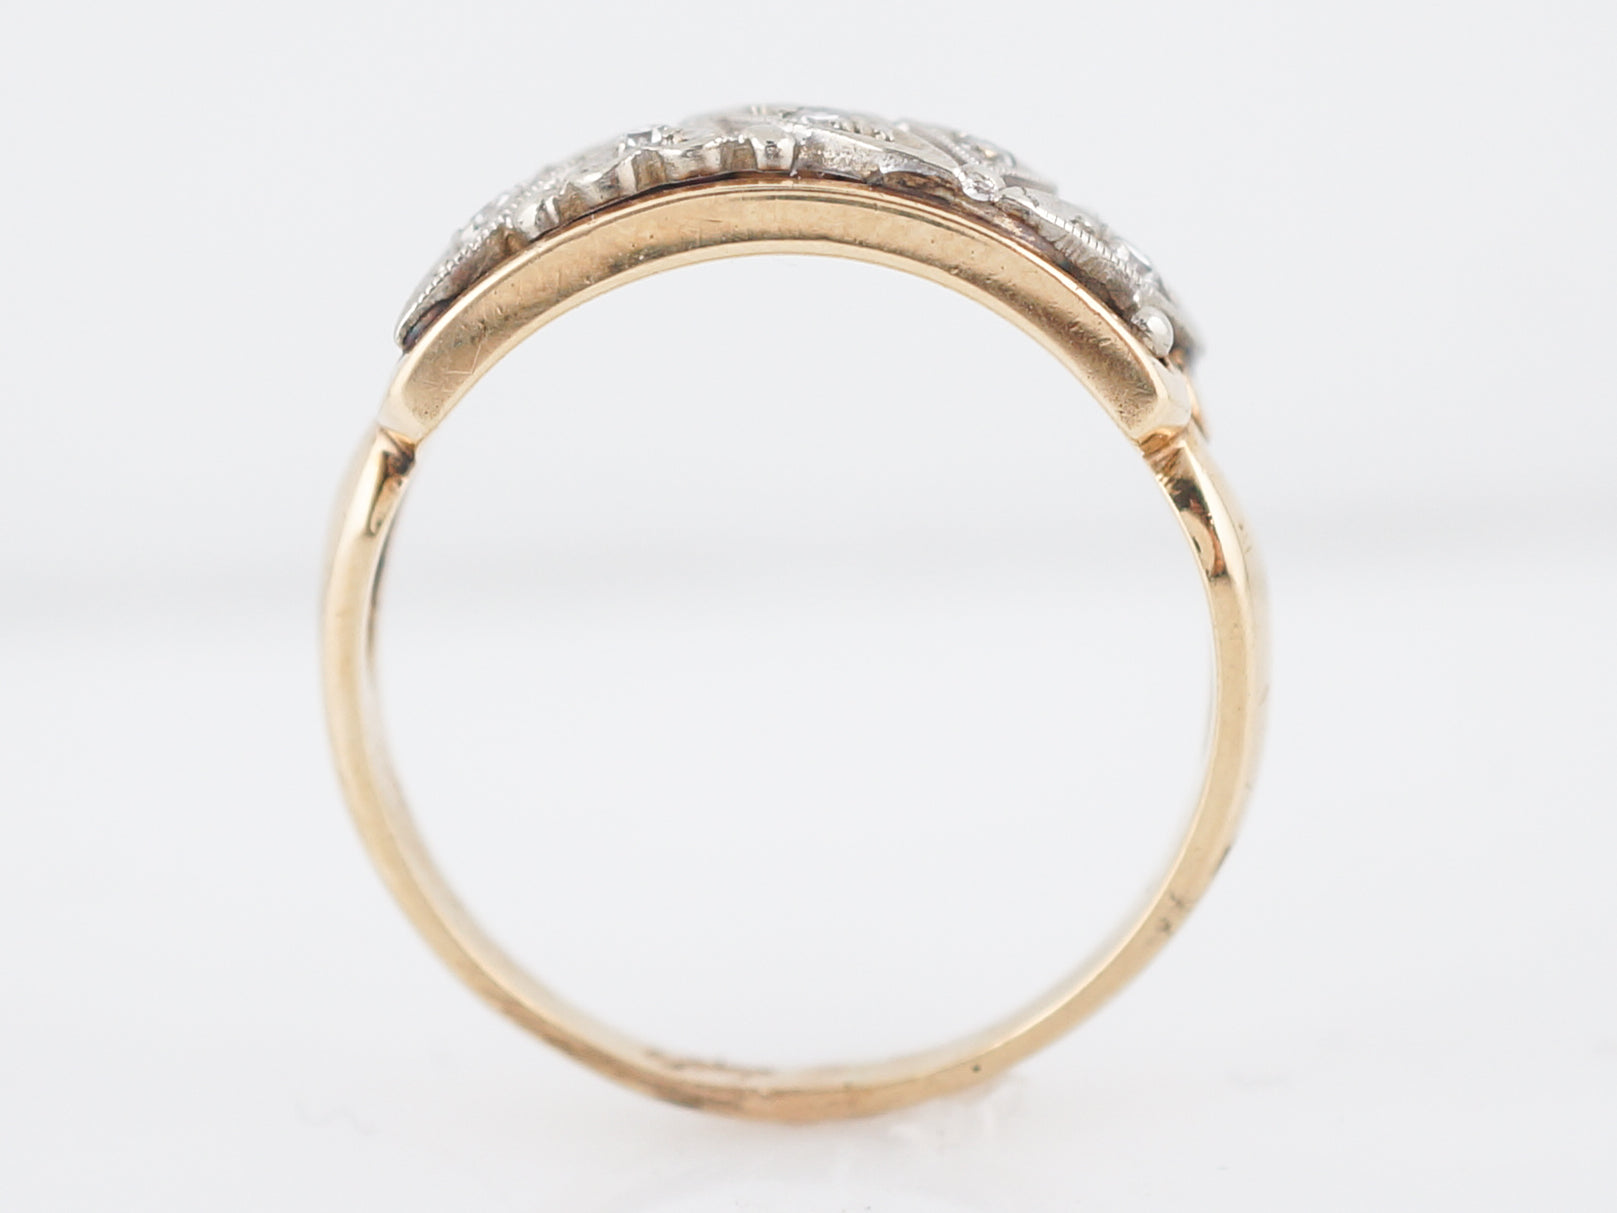 Vintage Right Hand Ring Mid-Century .05 Round Brilliant Cut Diamonds in 14K Yellow & White Gold